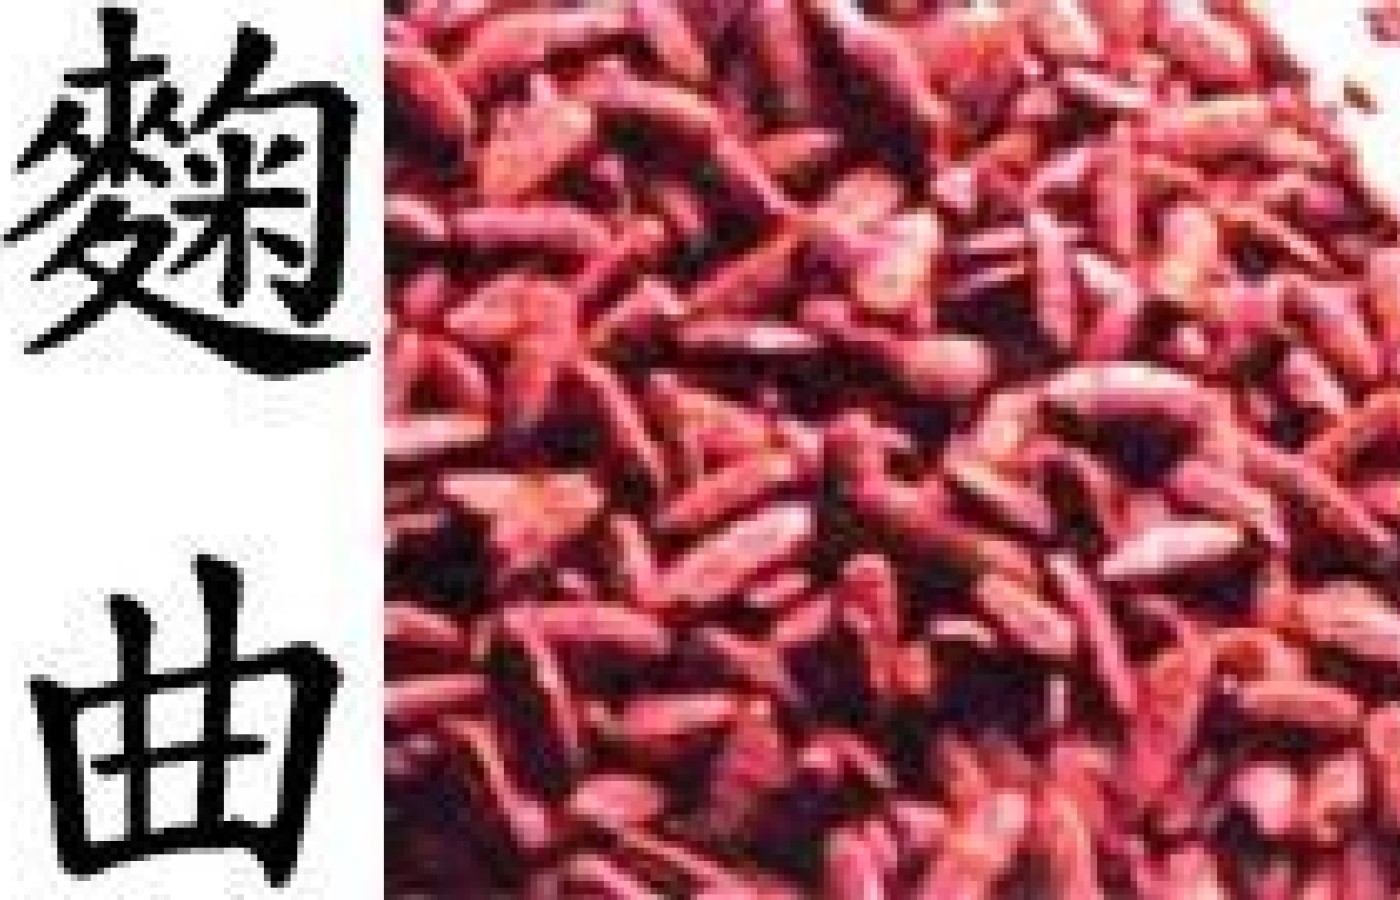 The chinese characters and an image of red yeast rice.